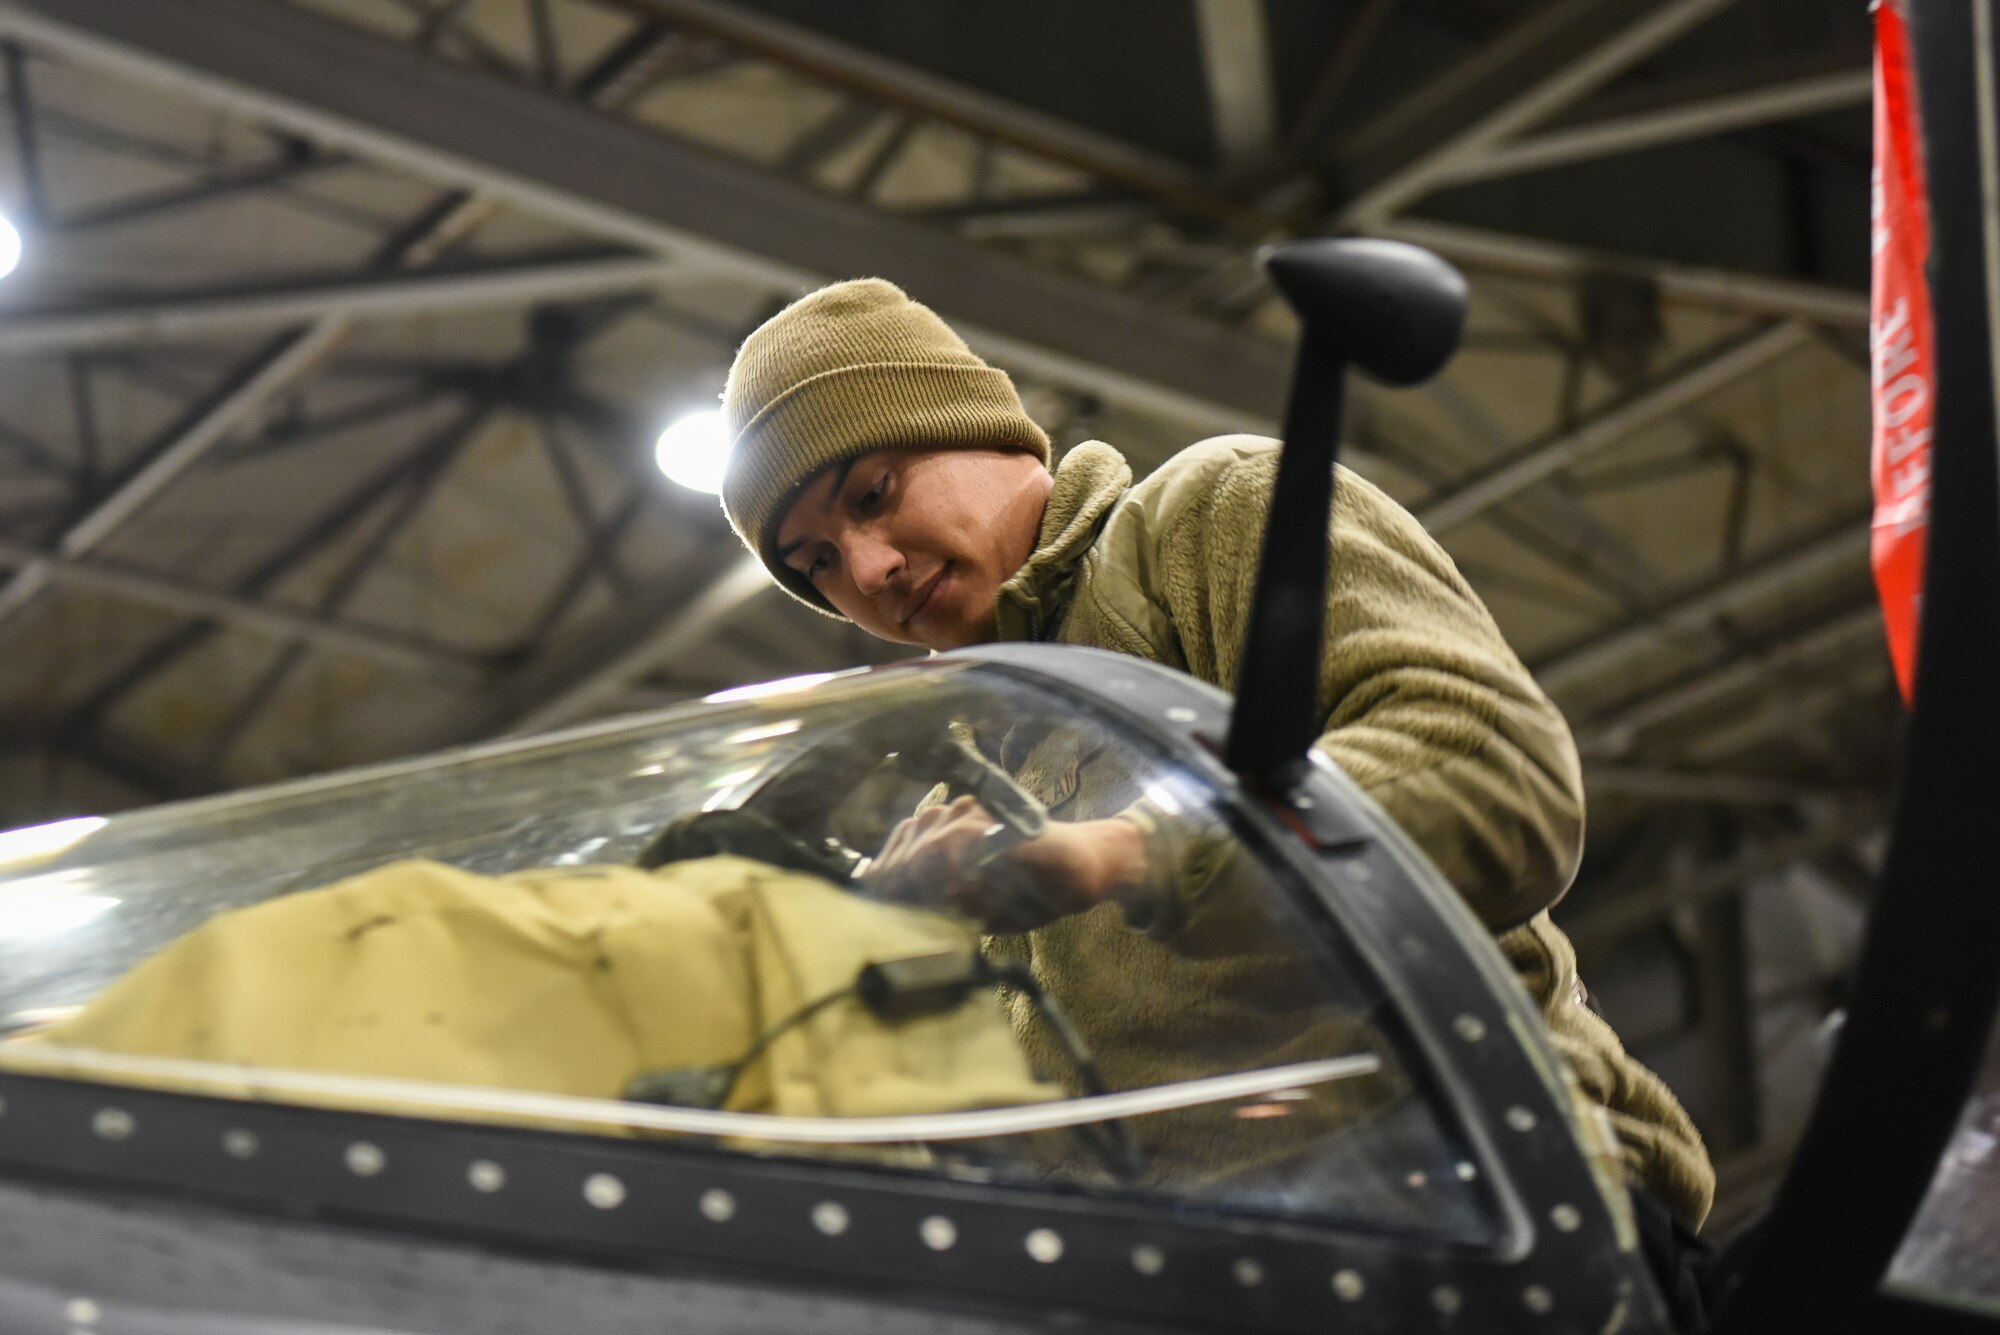 A U.S. Air Force 9th Aircraft Maintenance Squadron dedicated crew chief conducts a canopy inspection on the U-2 Dragon Lady after recovery from a night mission in support of Dragon Flag EAST, March 27, 2023, at Offutt Air Force Base, Nebraska.